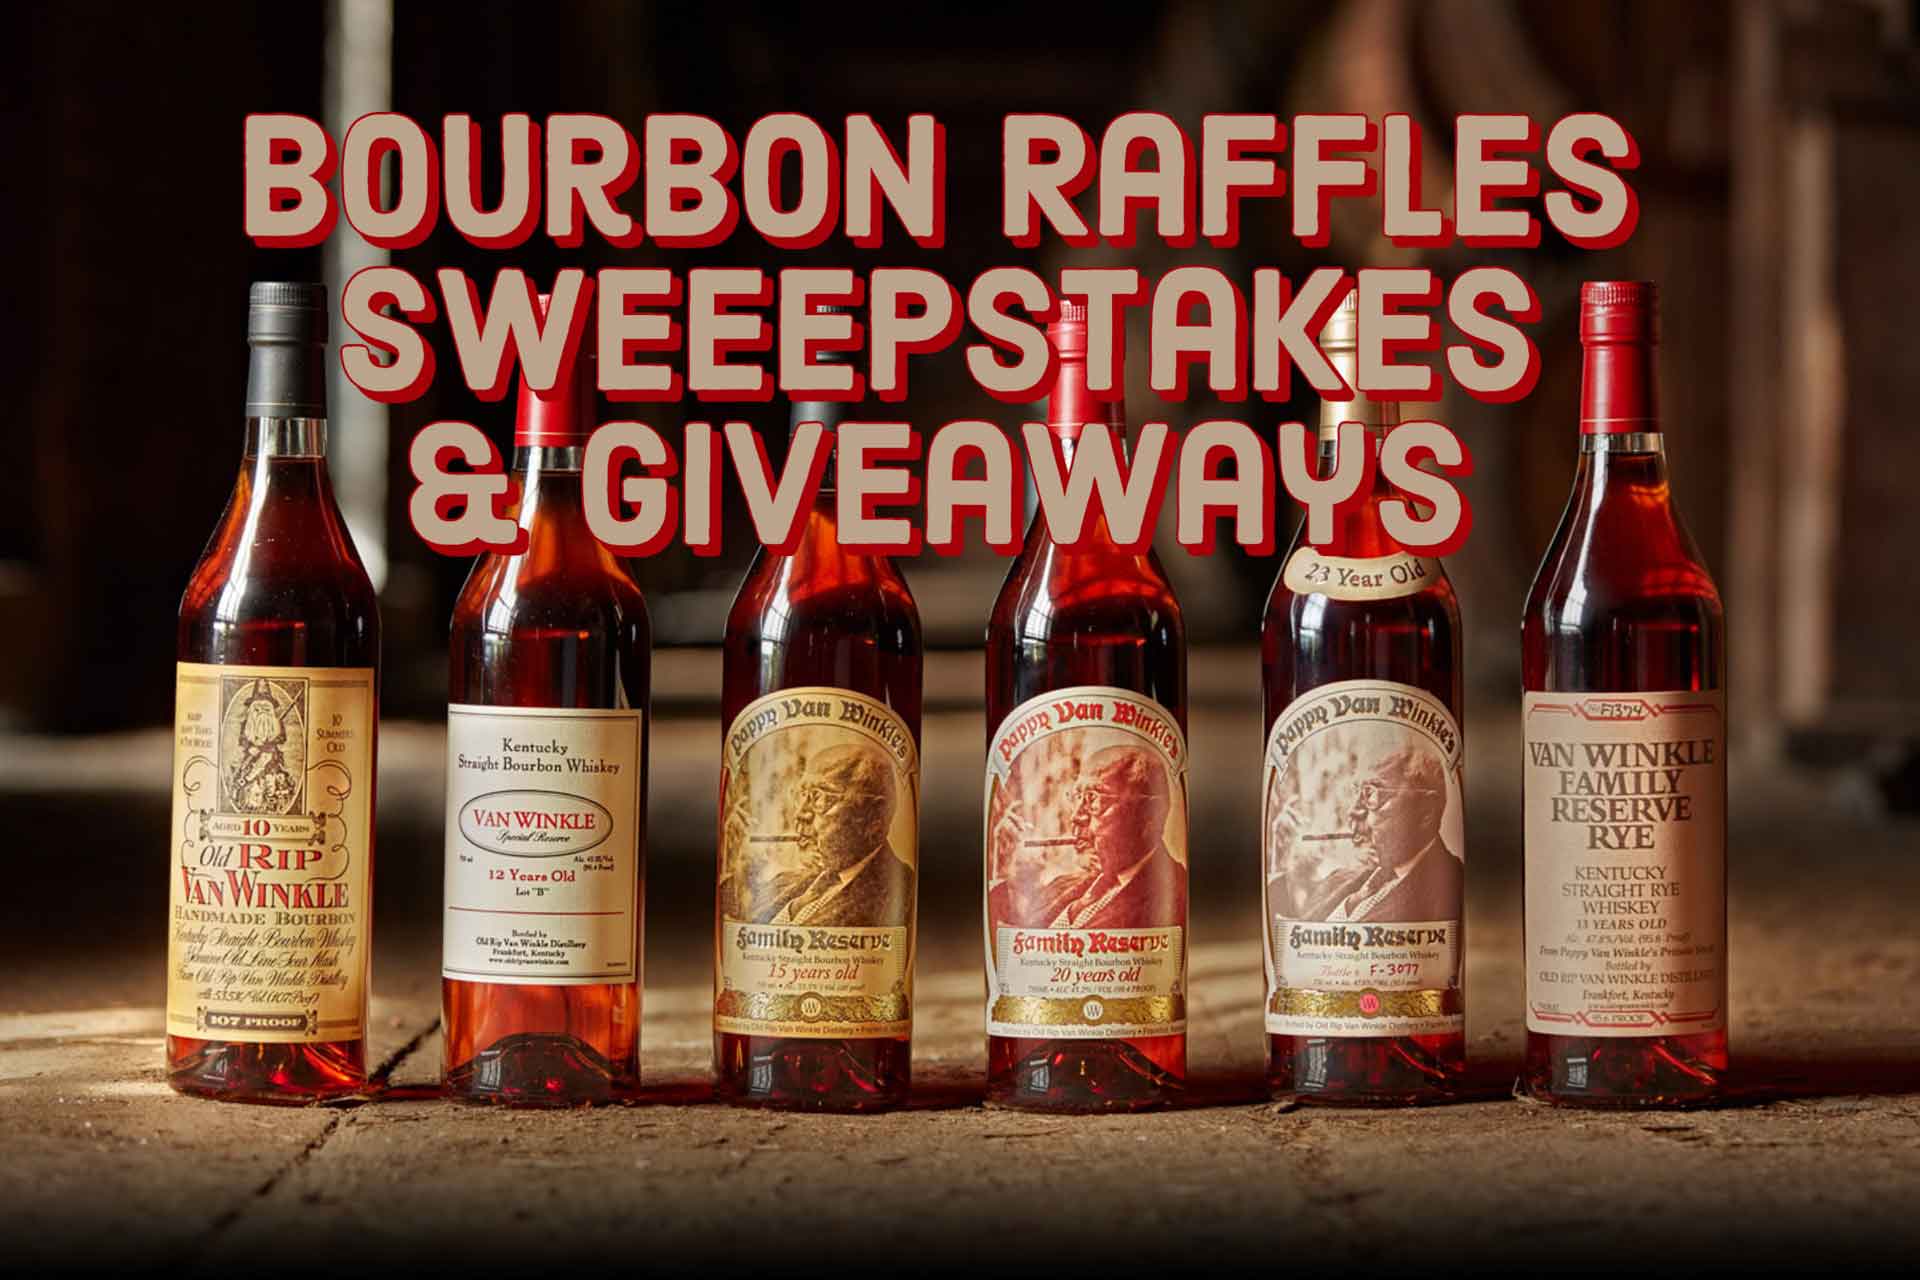 Latest Bourbon Raffles, Giveaways, and Sweepstakes to Enter KY Supply Co